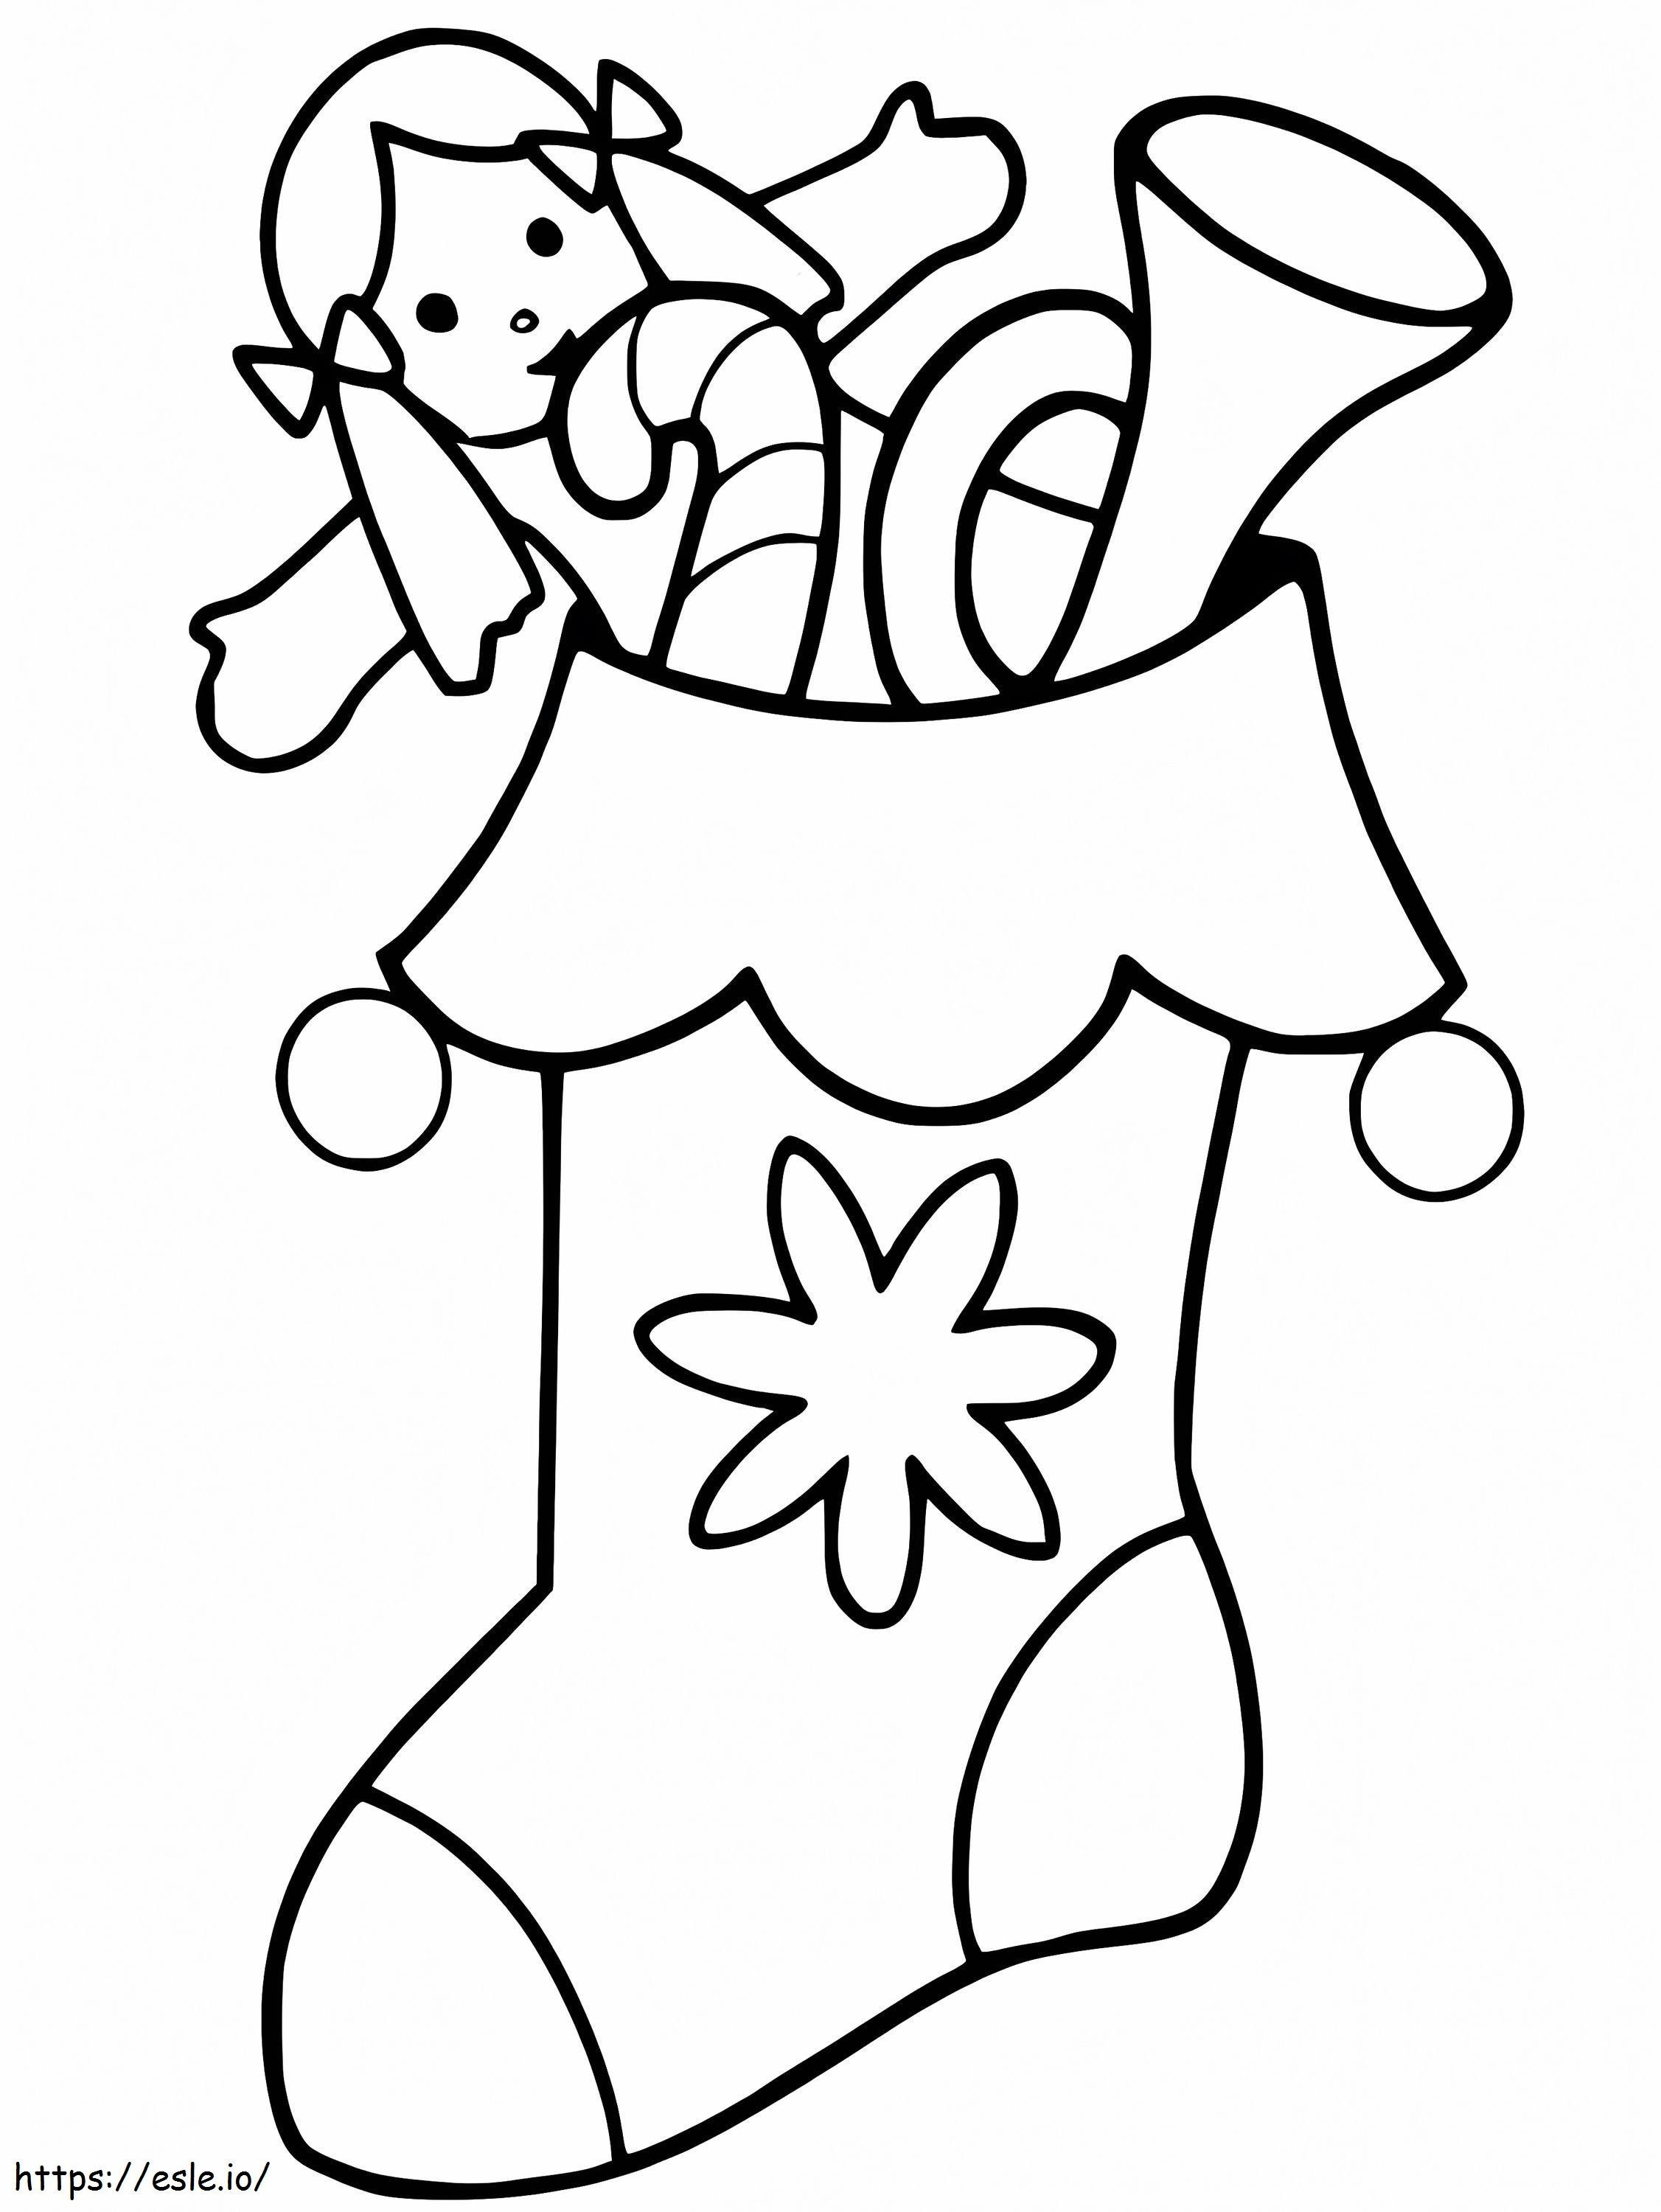 Christmas Stocking 11 coloring page